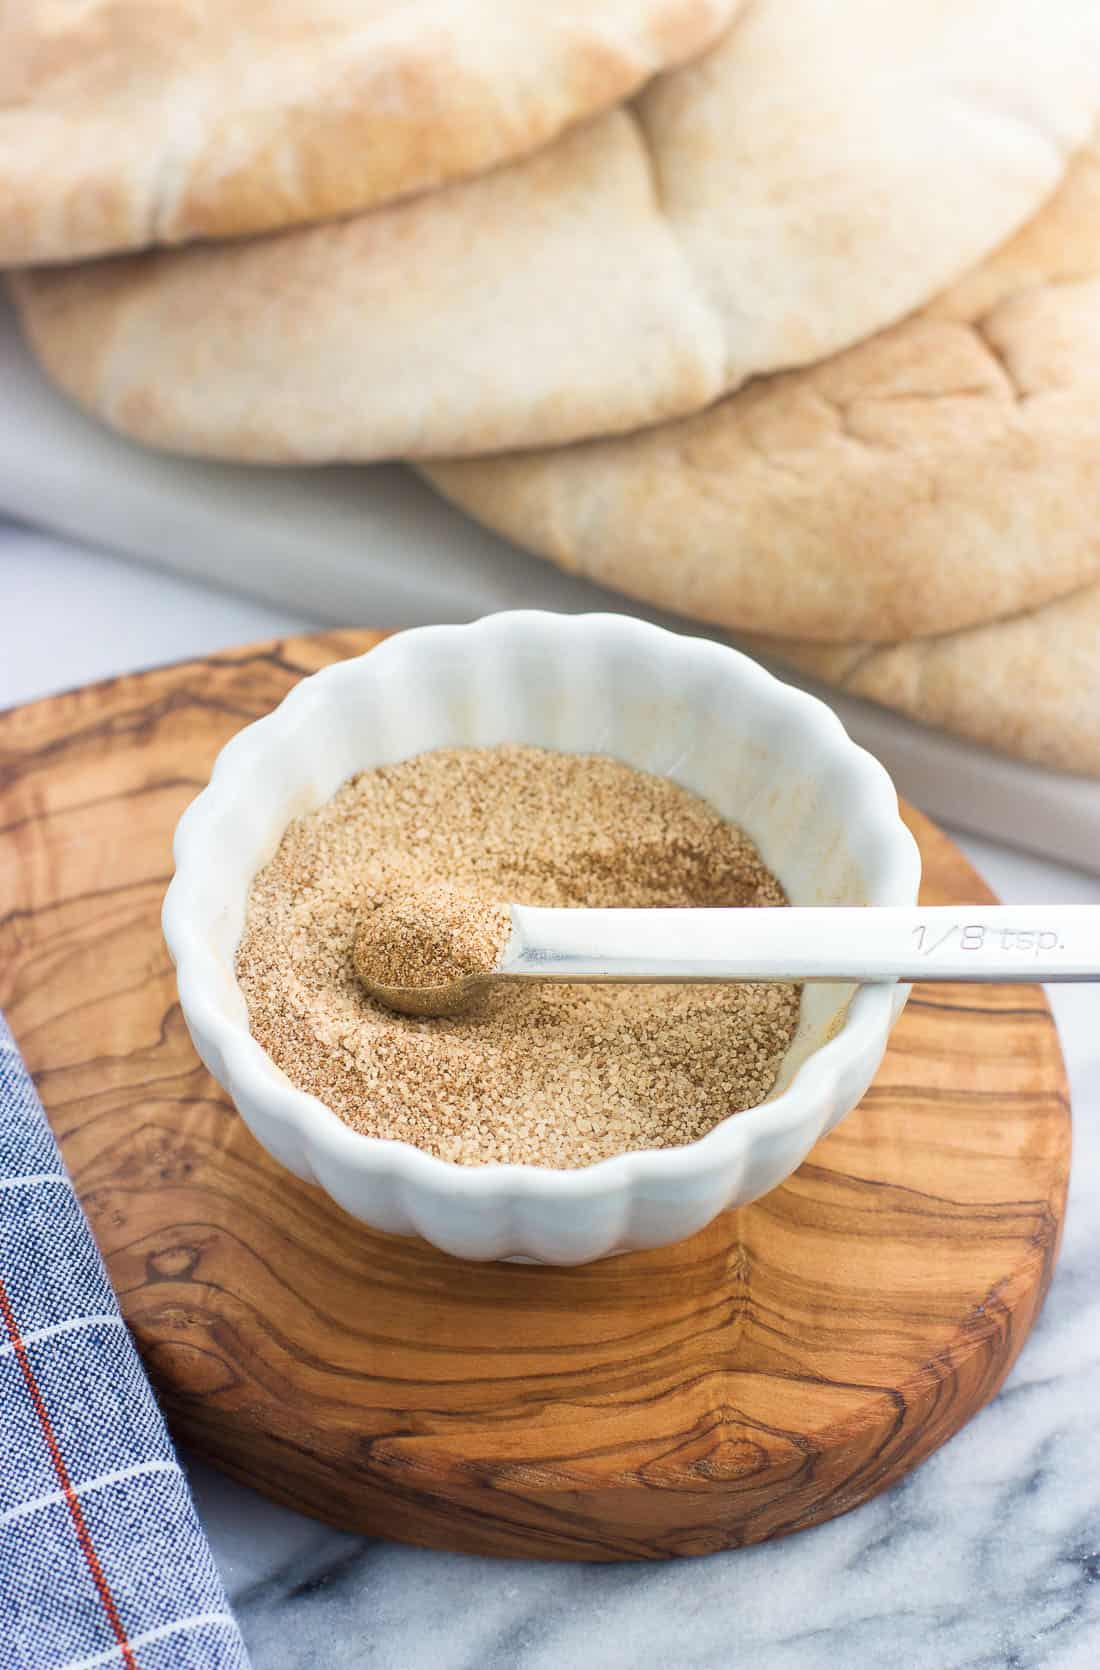 Cinnamon sugar mixed together in a small ceramic bowl with a small measuring spoon dipped in